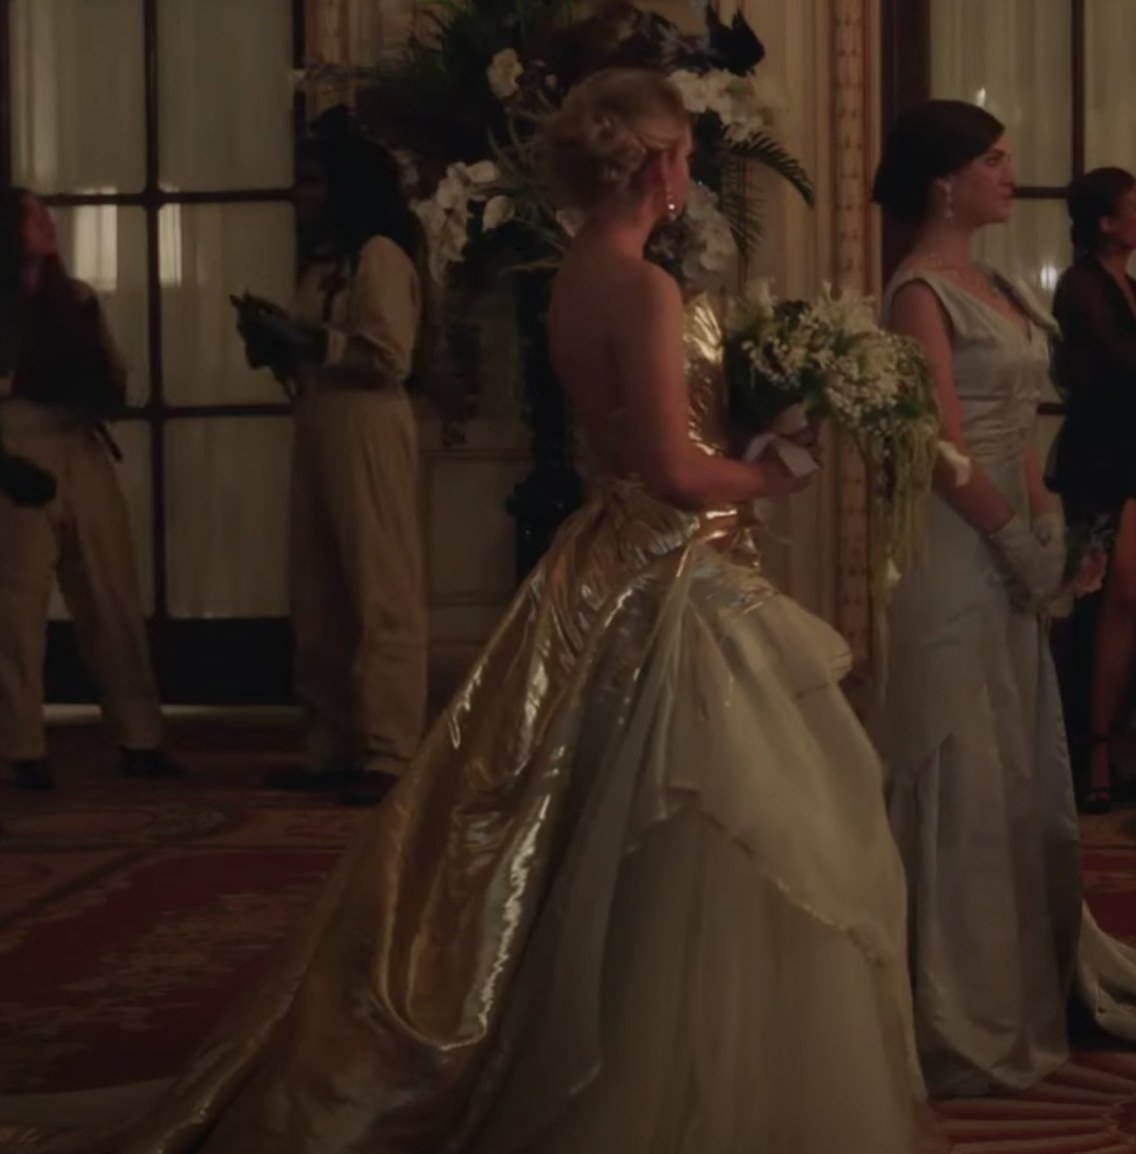 Bianca and Pippa in gold wedding dress and silver cotillion dress